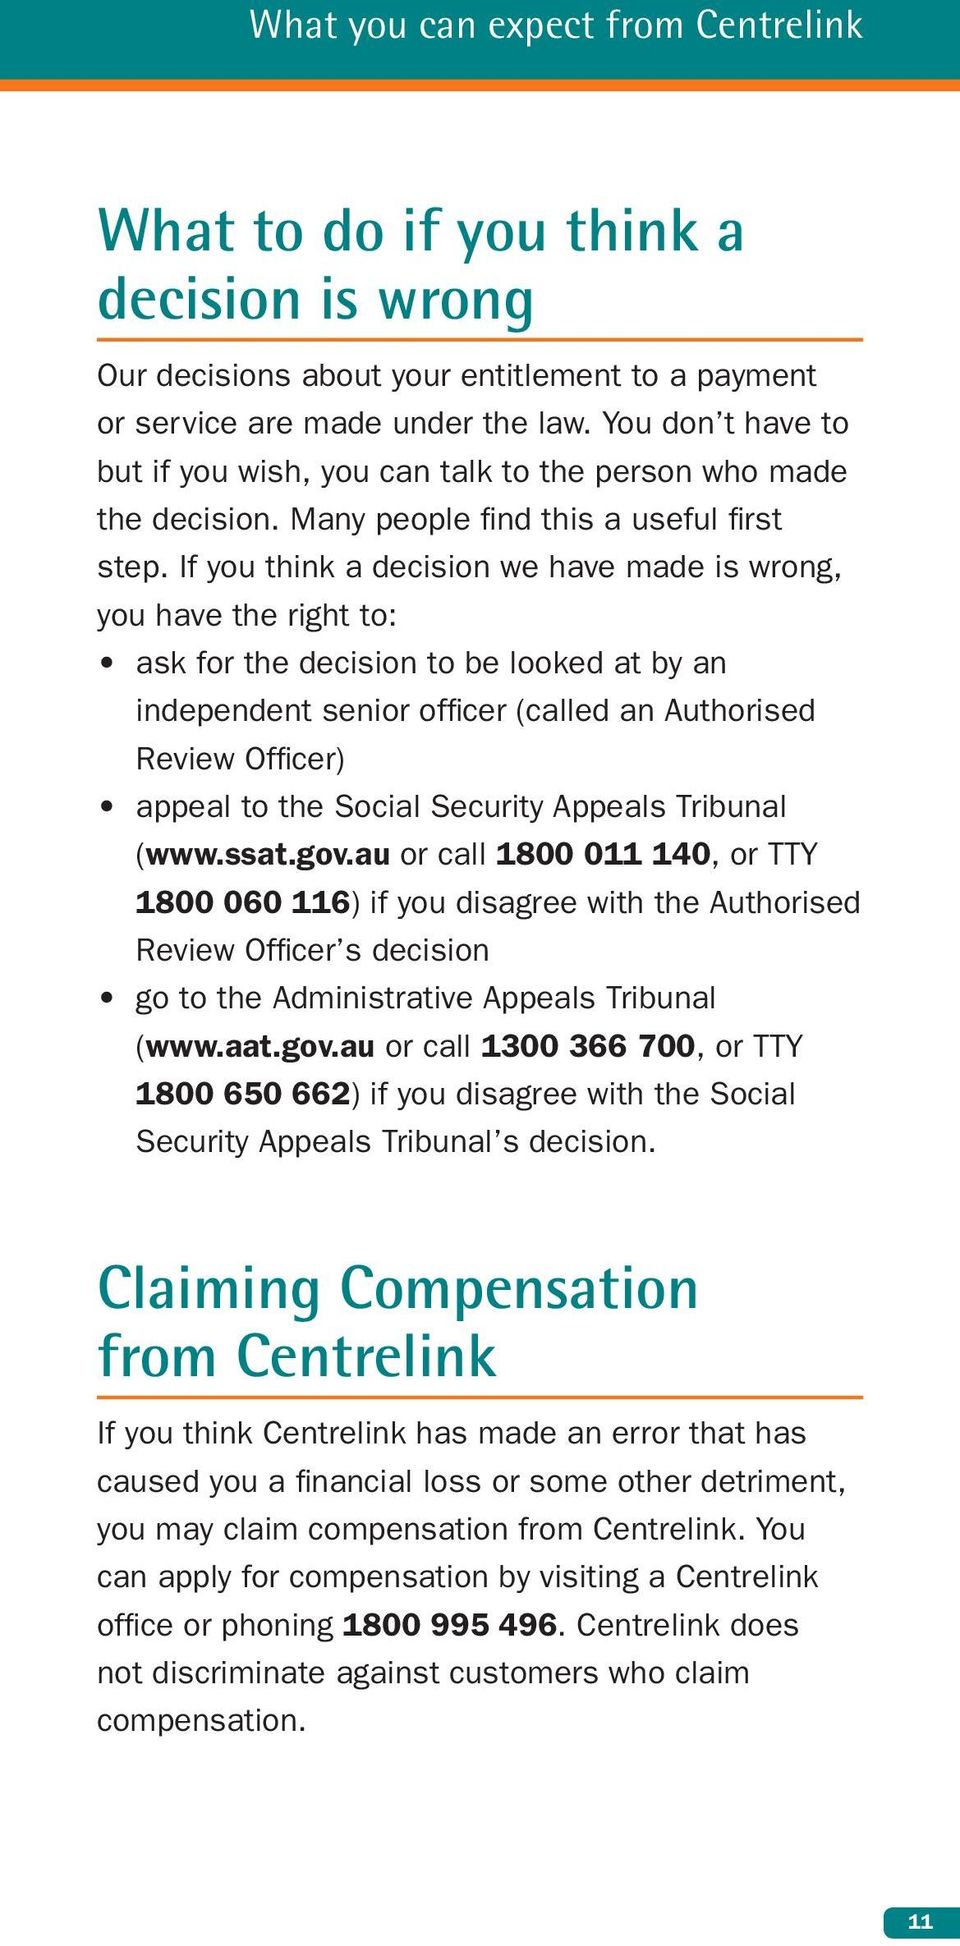 If you think a decision we have made is wrong, you have the right to: ask for the decision to be looked at by an independent senior offi cer (called an Authorised Review Offi cer) appeal to the